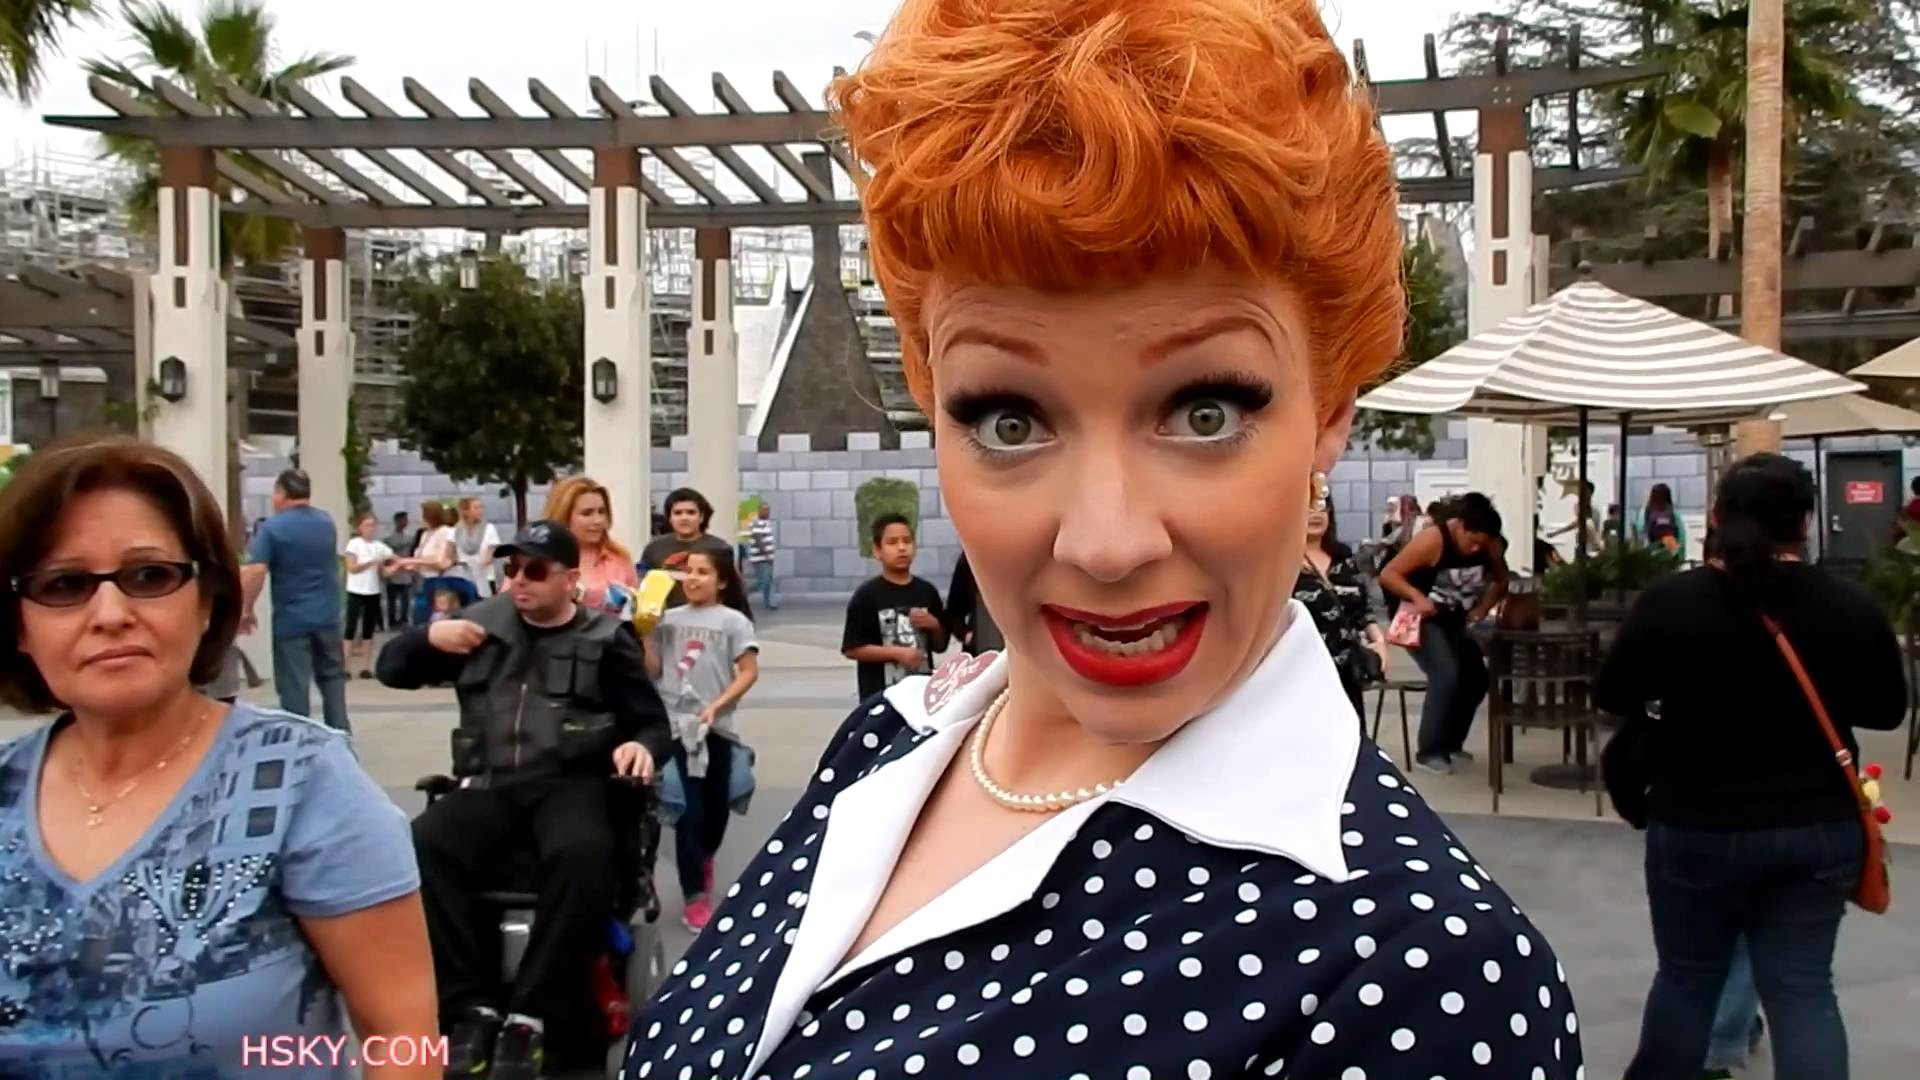 1920x1080 V#163 HSKY 2015 Lucy from "I Love Lucy" TV icon Universal Studios Hollywood  HD